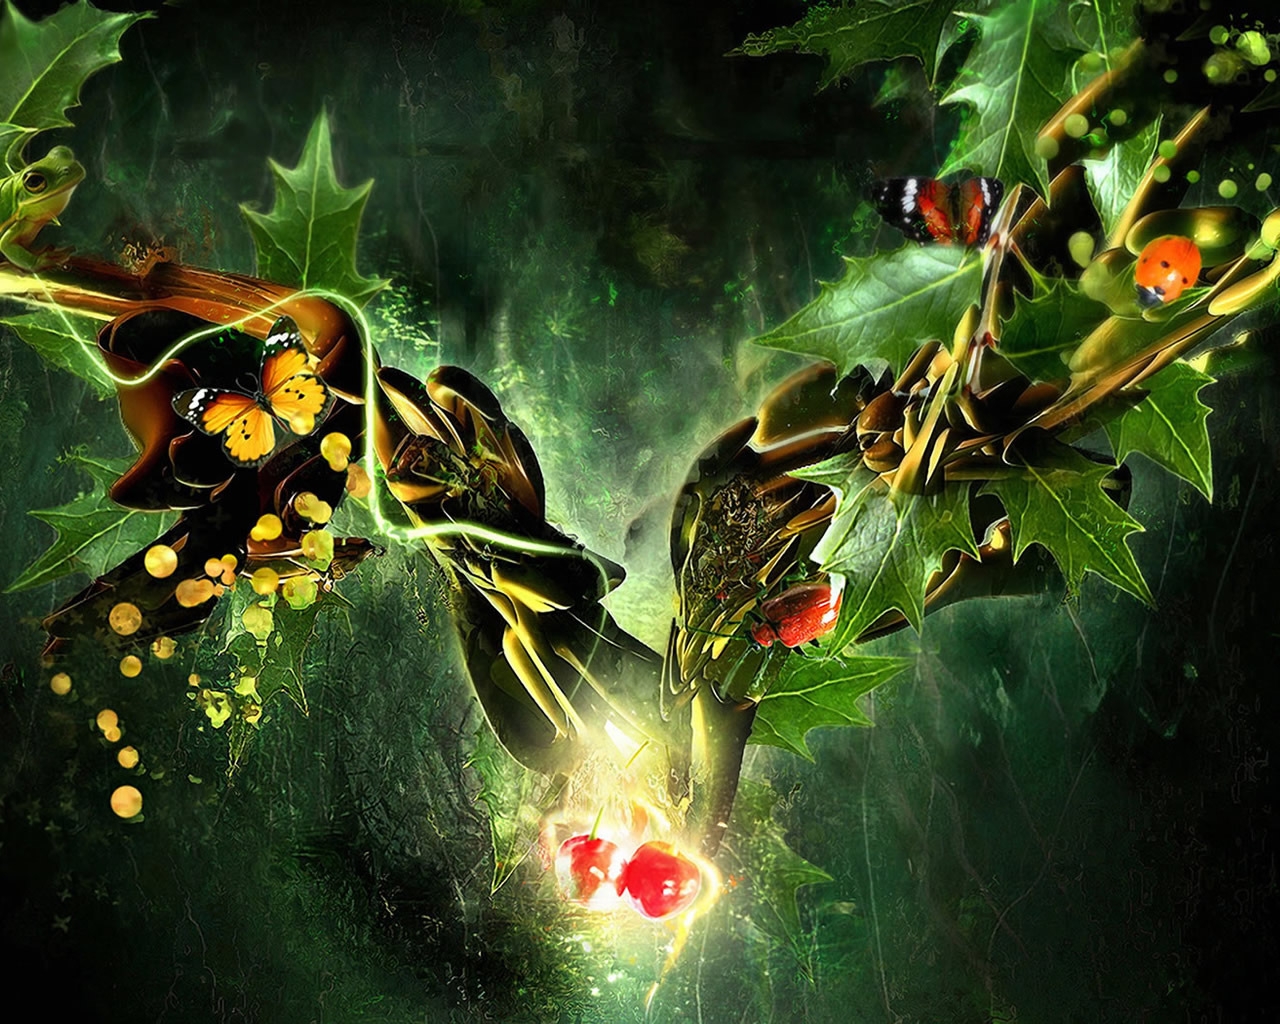 Butterfly, Ladybug, Frog in a Fantasy World for 1280 x 1024 resolution